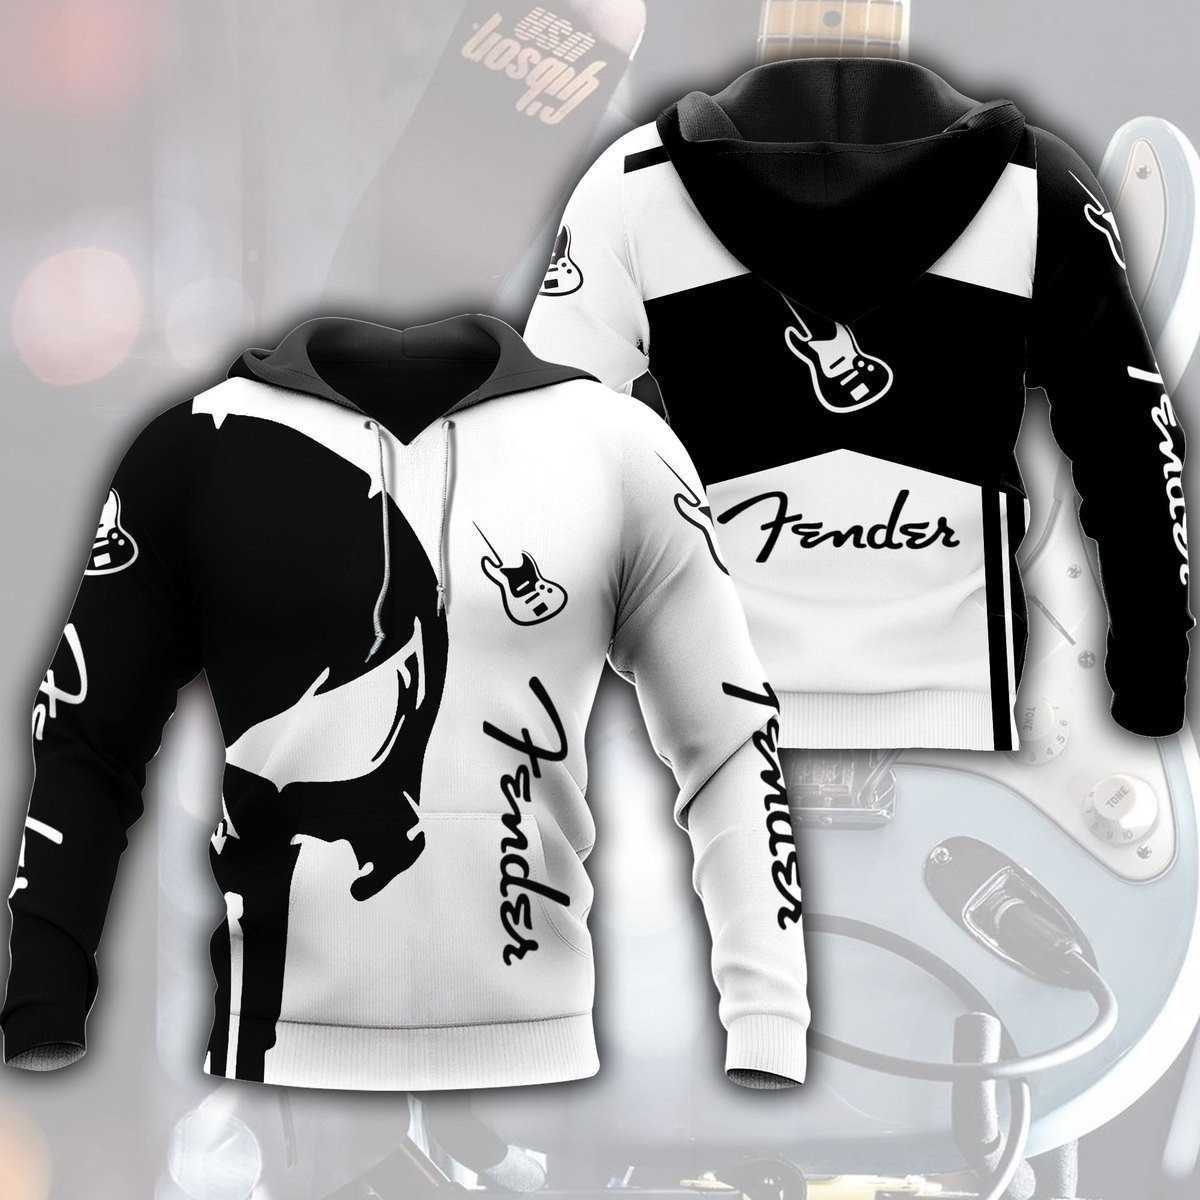 Shop now and get ready to make crazy up in style with top custom hoodie below! 140